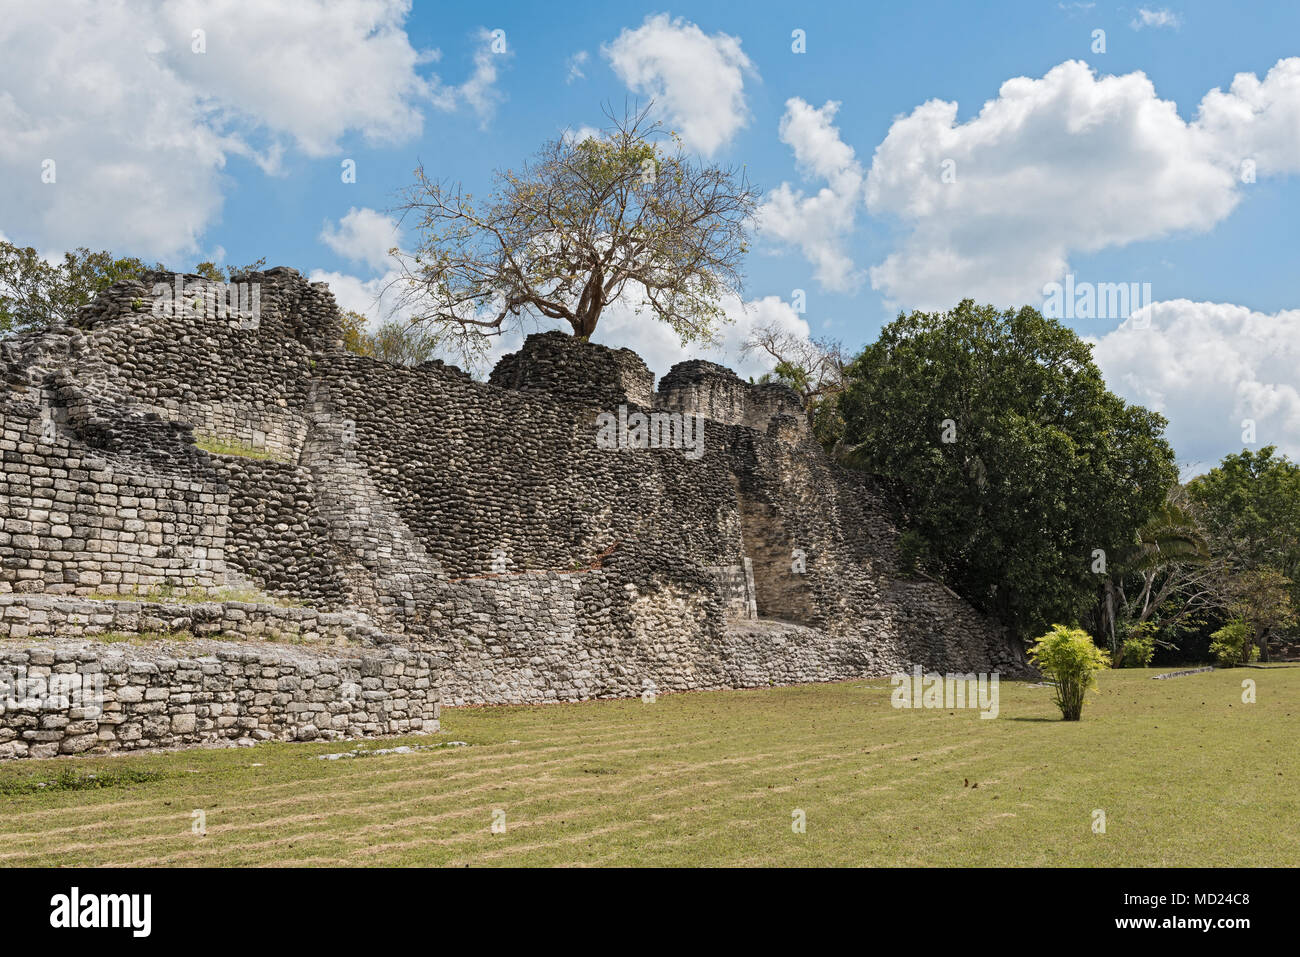 The ruins of the ancient Mayan city of Kohunlich, Quintana Roo, Mexico Stock Photo